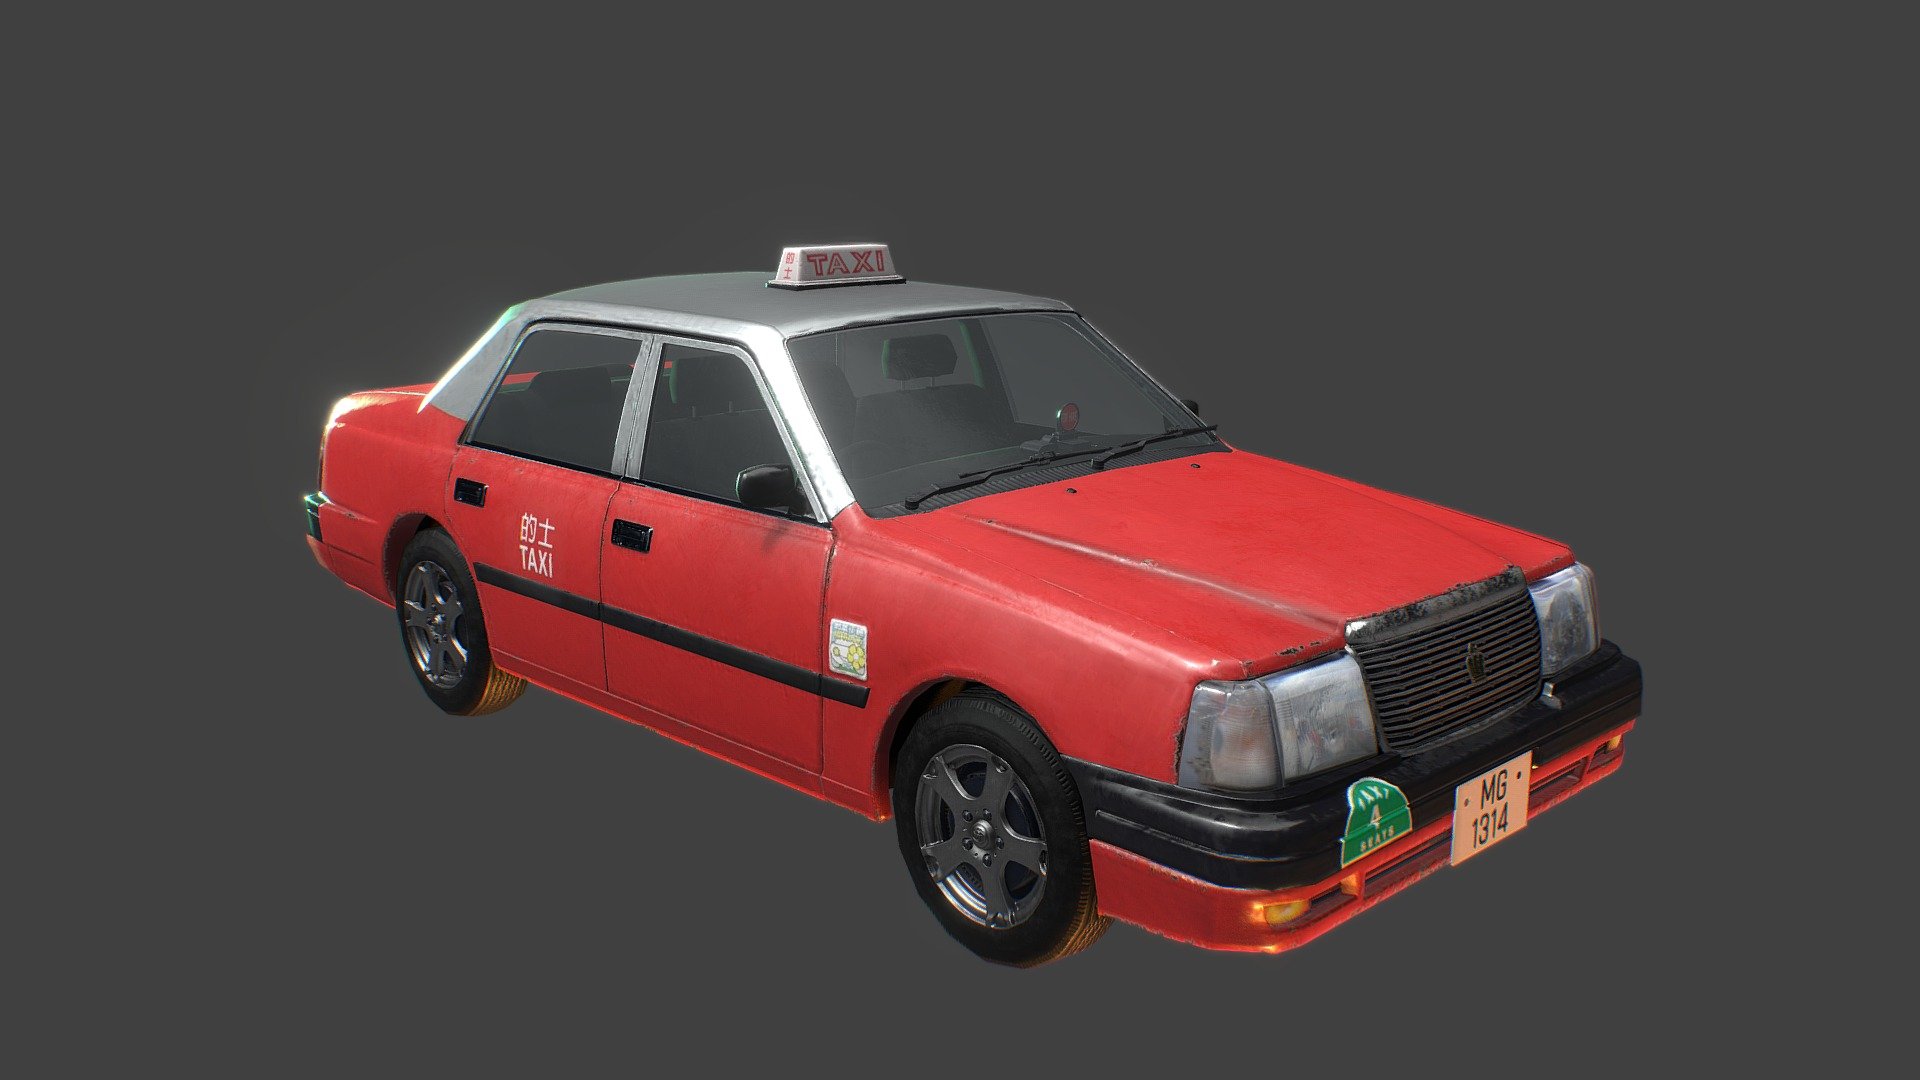 Version 1.0 of my Taxi 3D model,
created with Blender, Maya, Substance painter and photoshop

high poly model : 330 +k verts
low poly with normal map: 48k verts
4 UV shells with 2k PBR maps

more info on Artstation here.

Targets on Next version:
1. Further reduce poly counts on wheels and main body
2. Improve texture on glass and car lights
3. Include more component like mud flaps, rear view mirror, car boots, engine and chassis bottom - PBR Hong Kong Taxi 的士 Toyota Comfort - 3D model by twitte_king 3d model